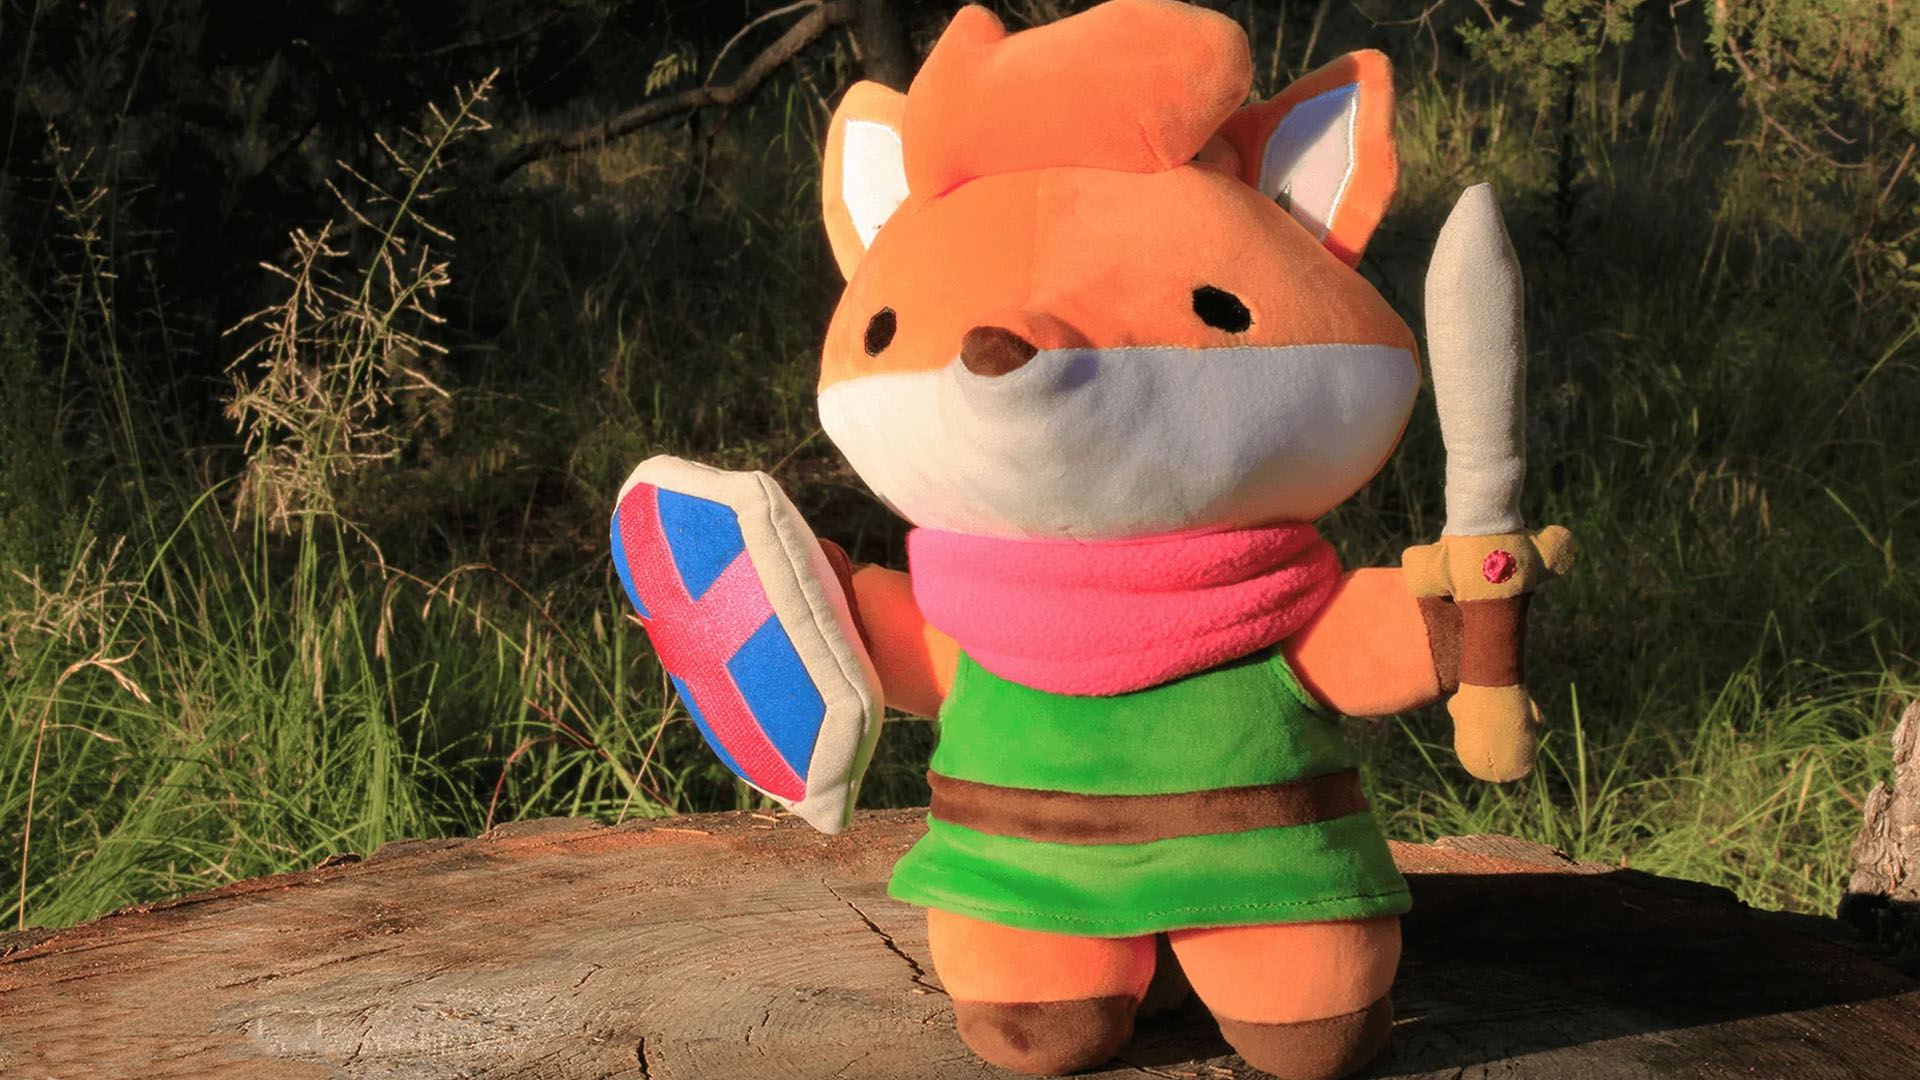 Tunic merchandise announced – tshirts, a plushie, and more